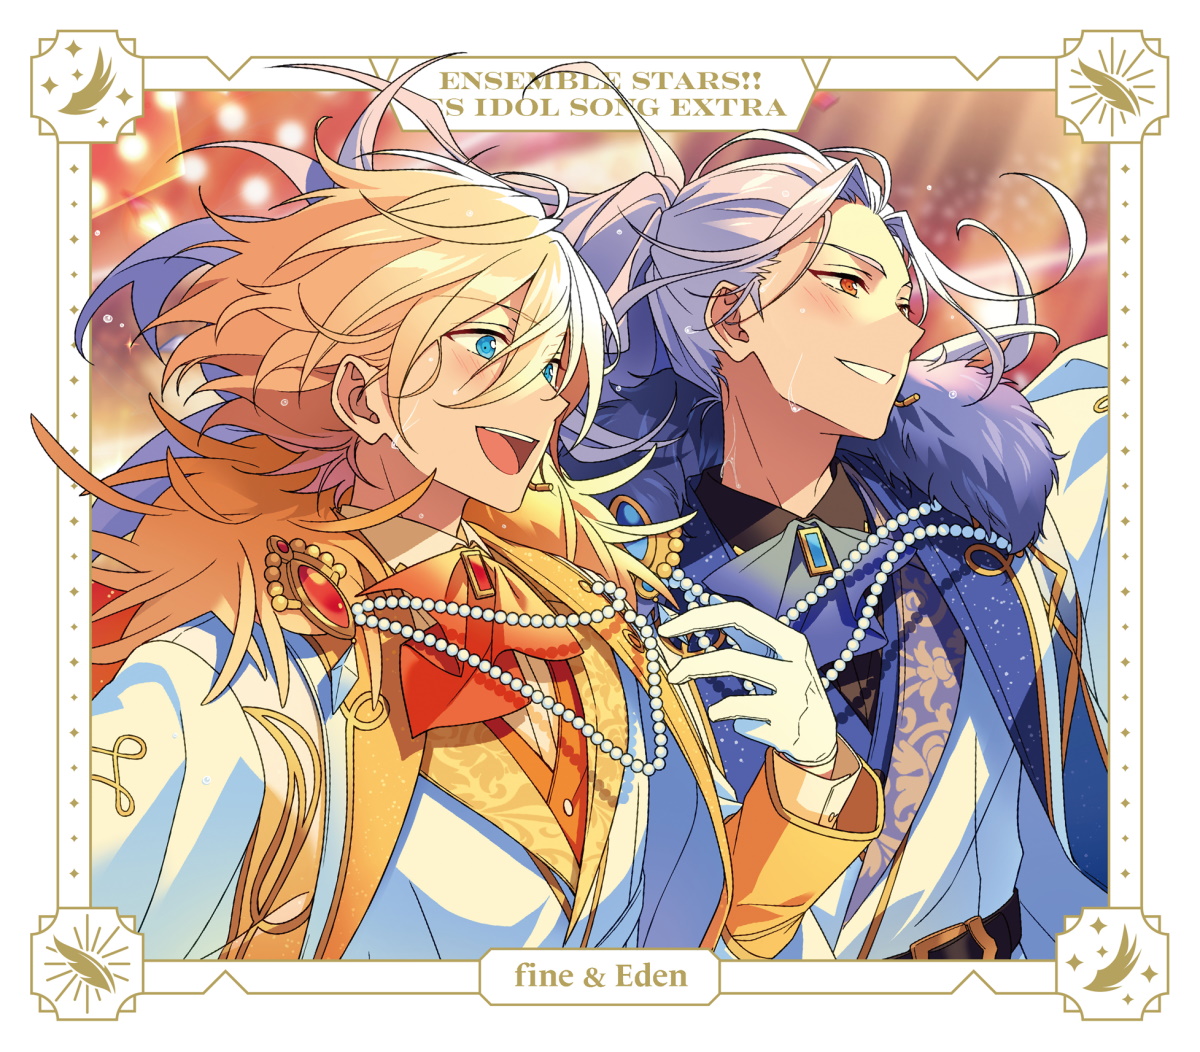 Cover for『Eden - Deep Eclipse』from the release『Ensemble Stars!! ES Idol Song Extra fine & Eden』